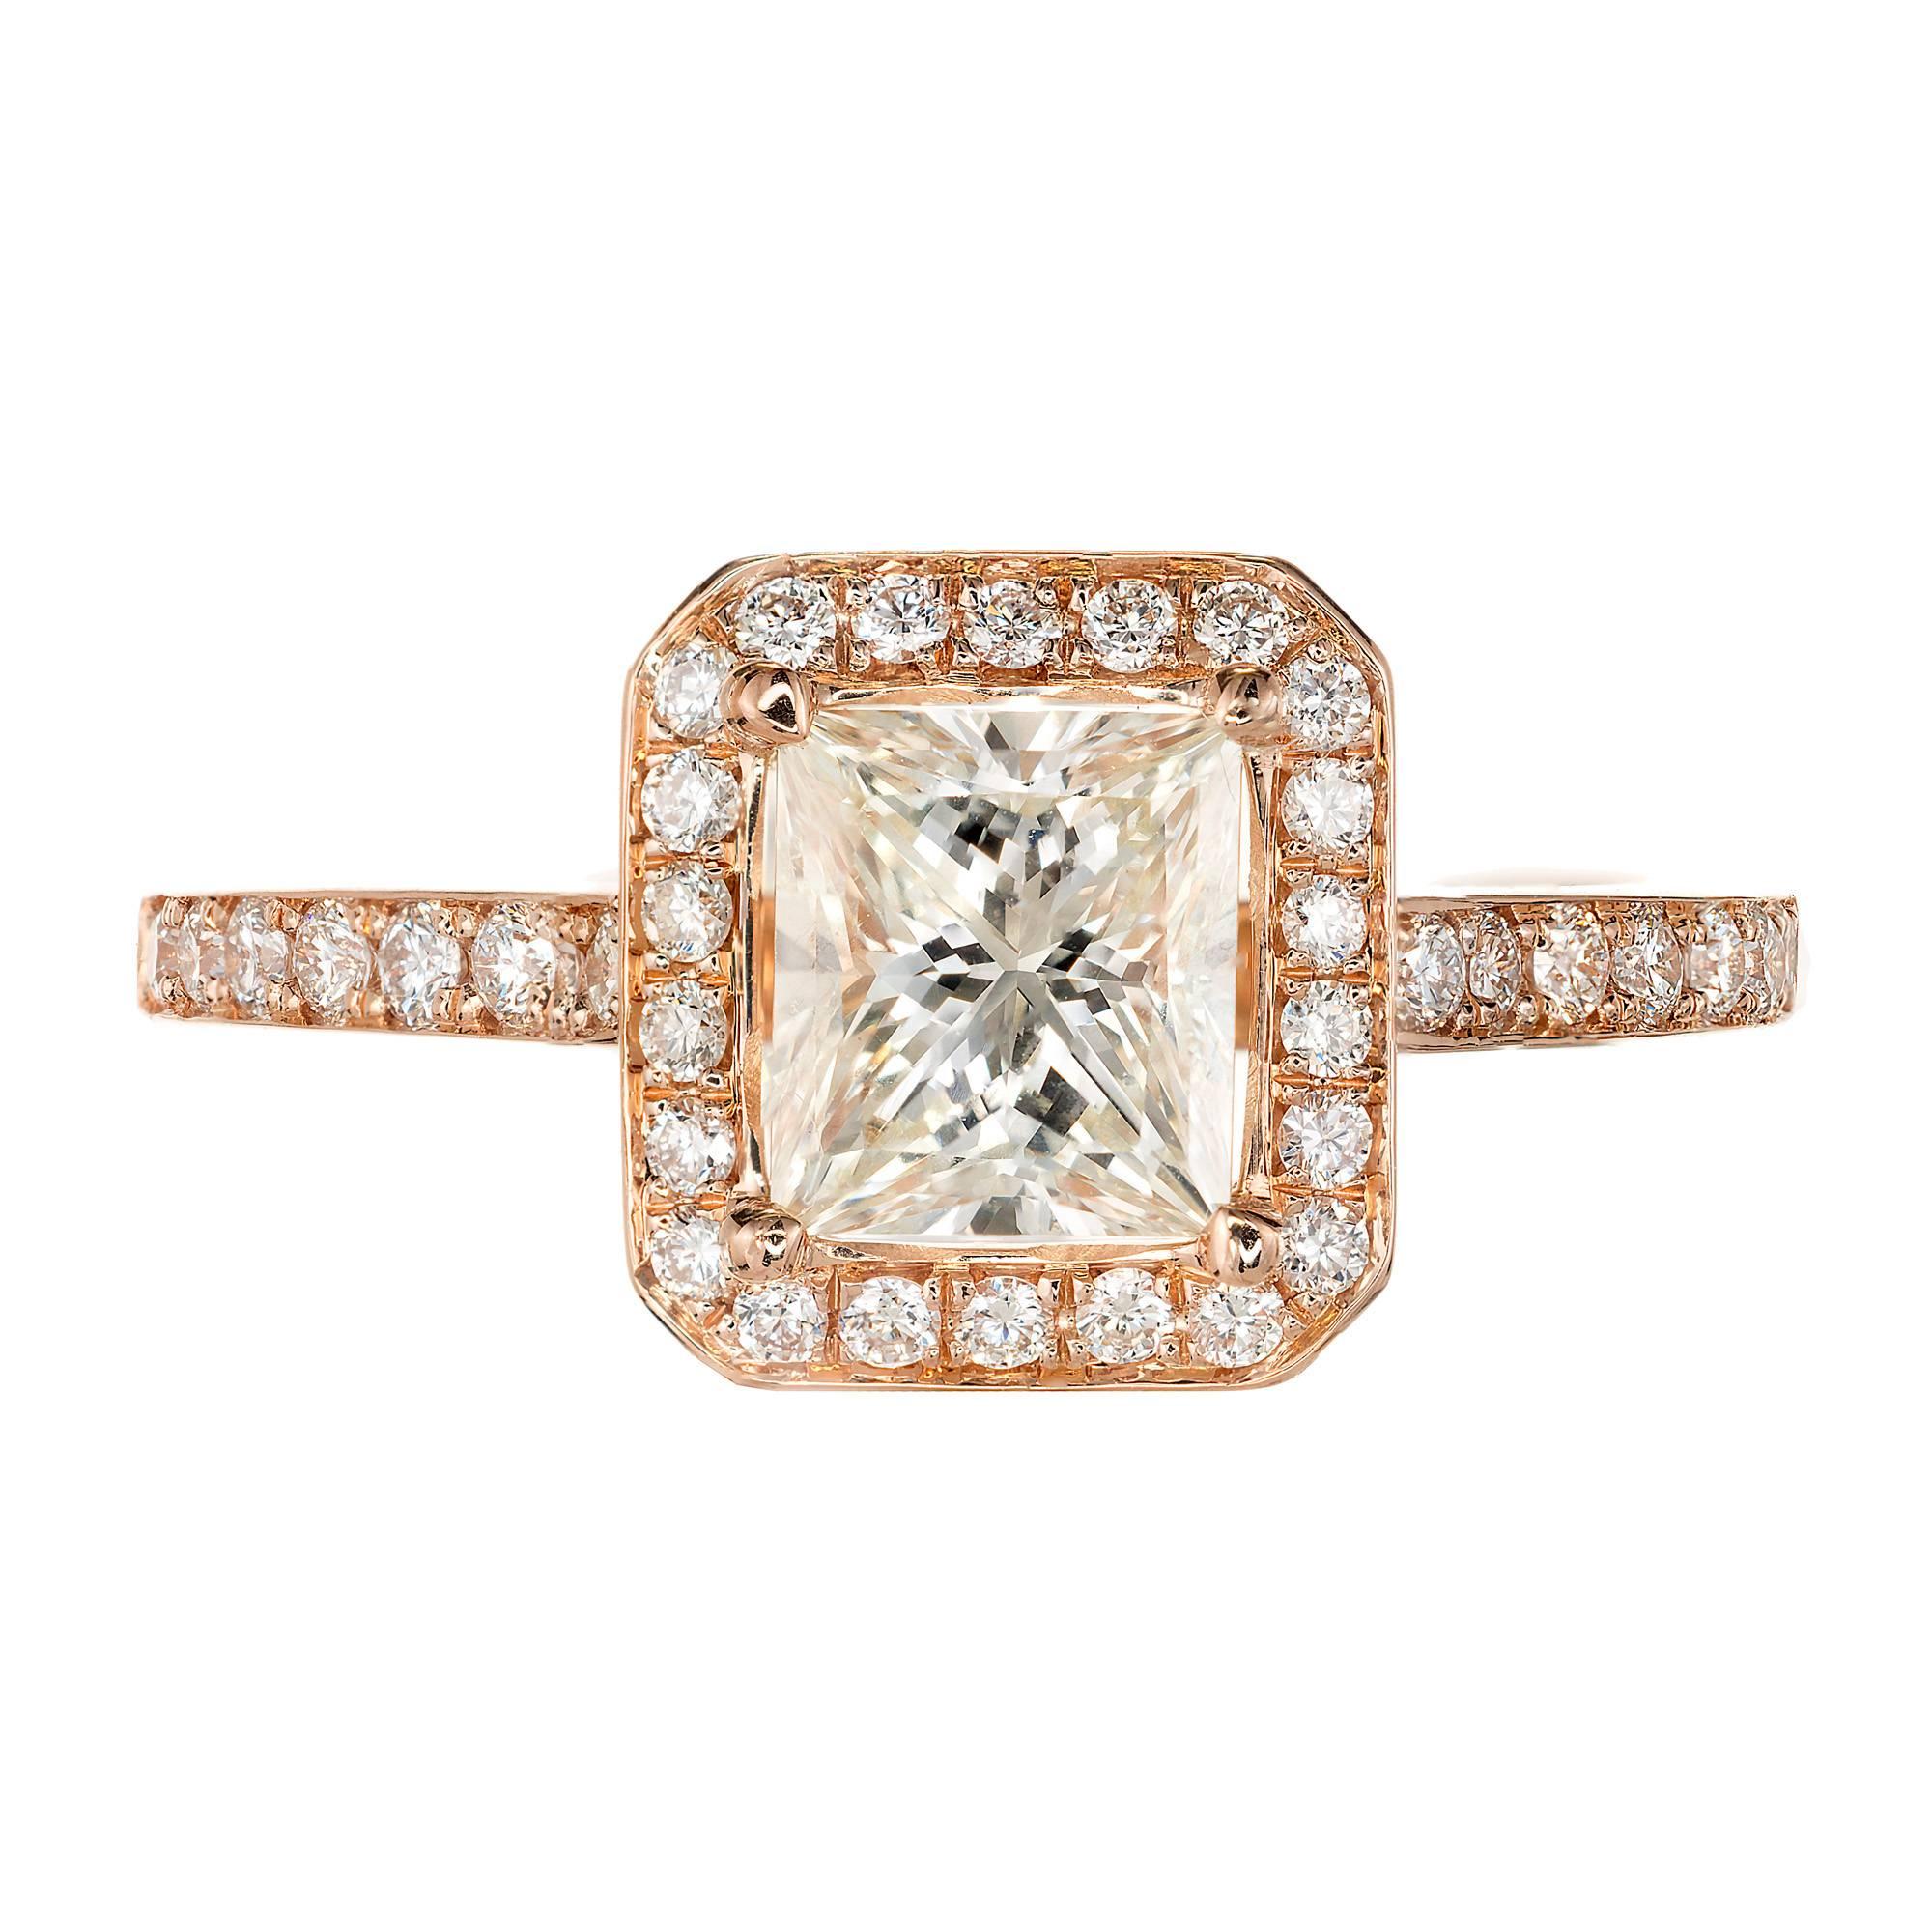 1.00ct Princess cut diamond halo 18k rose gold engagement ring. 1.00ct GIA certified princess cut center stone with 36 round accent diamonds. Created in the Peter Suchy Designs. A wedding band fits flush next the shank. 

1 Princess cut diamond,